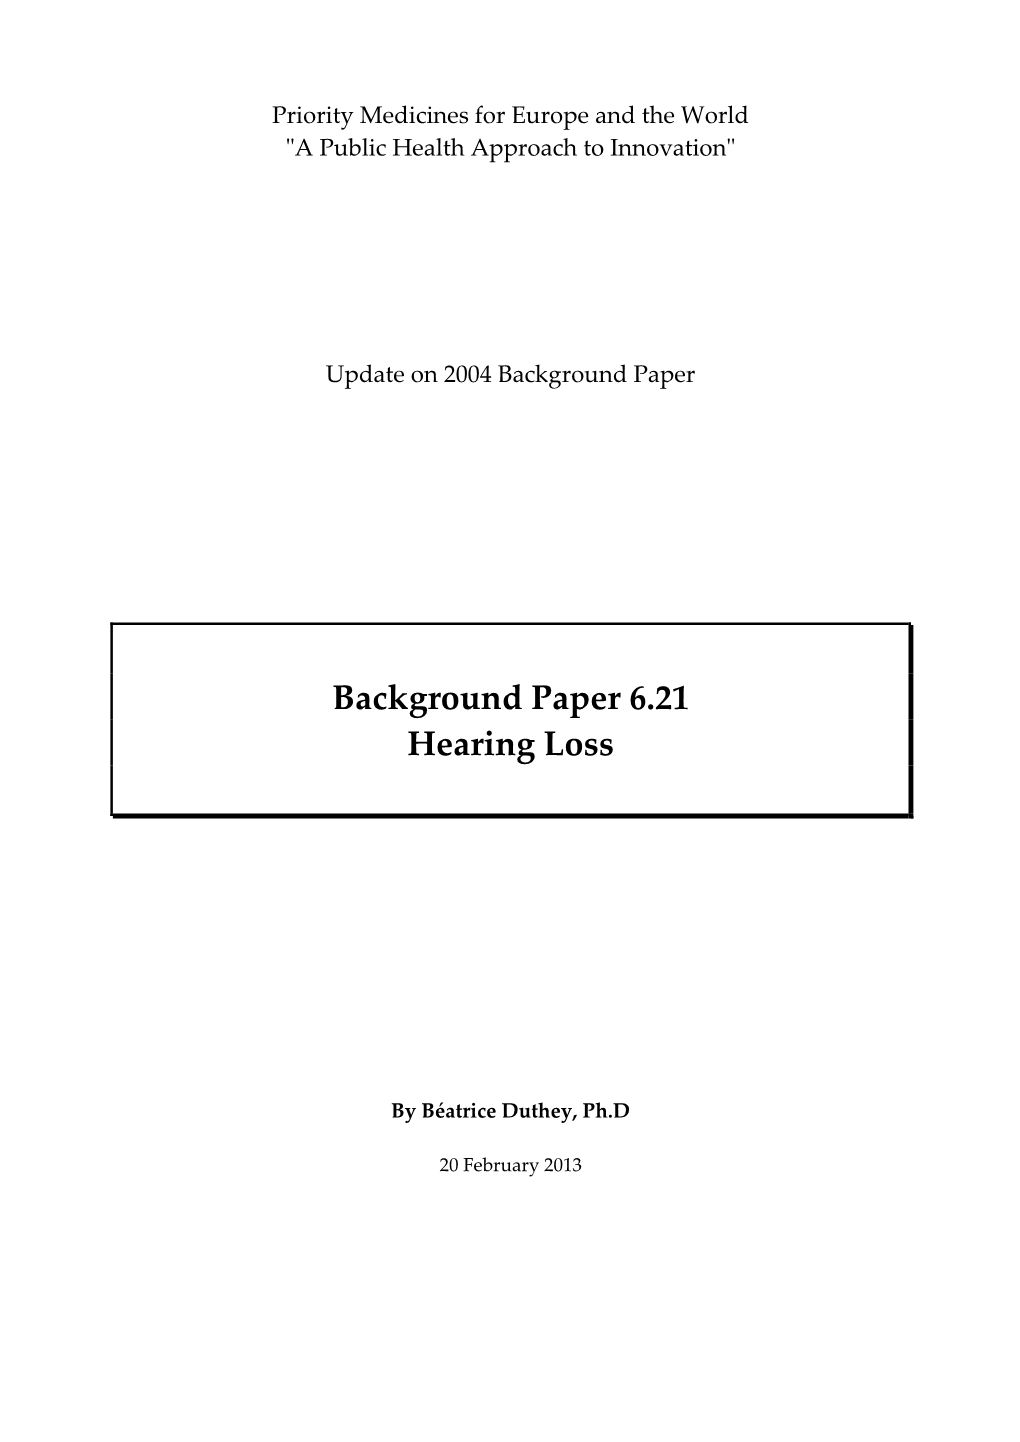 Background Paper 6.21 Hearing Loss